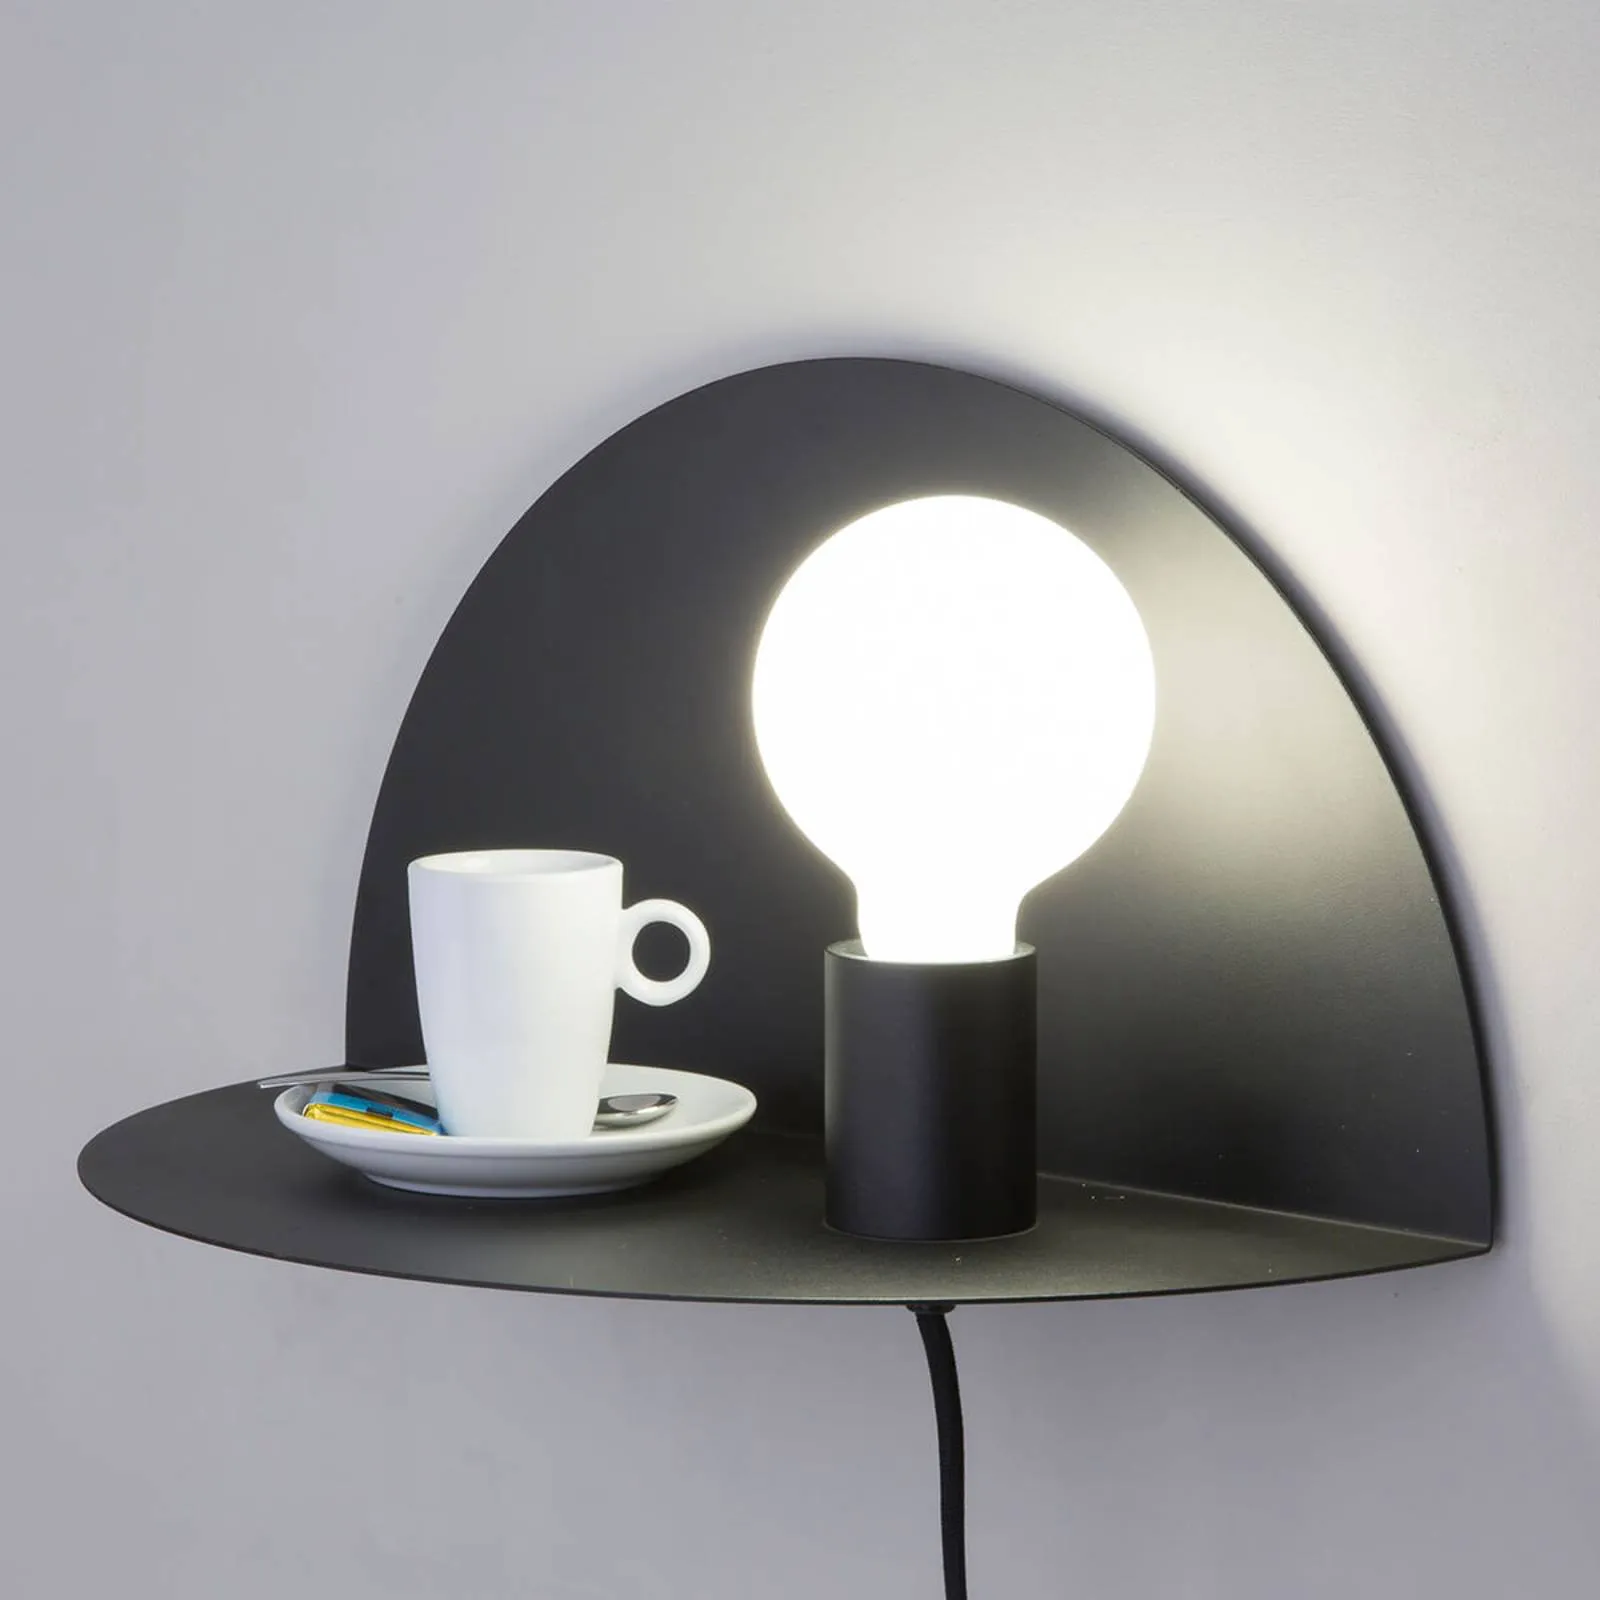 Nit wall lamp that can be used as a bedside table